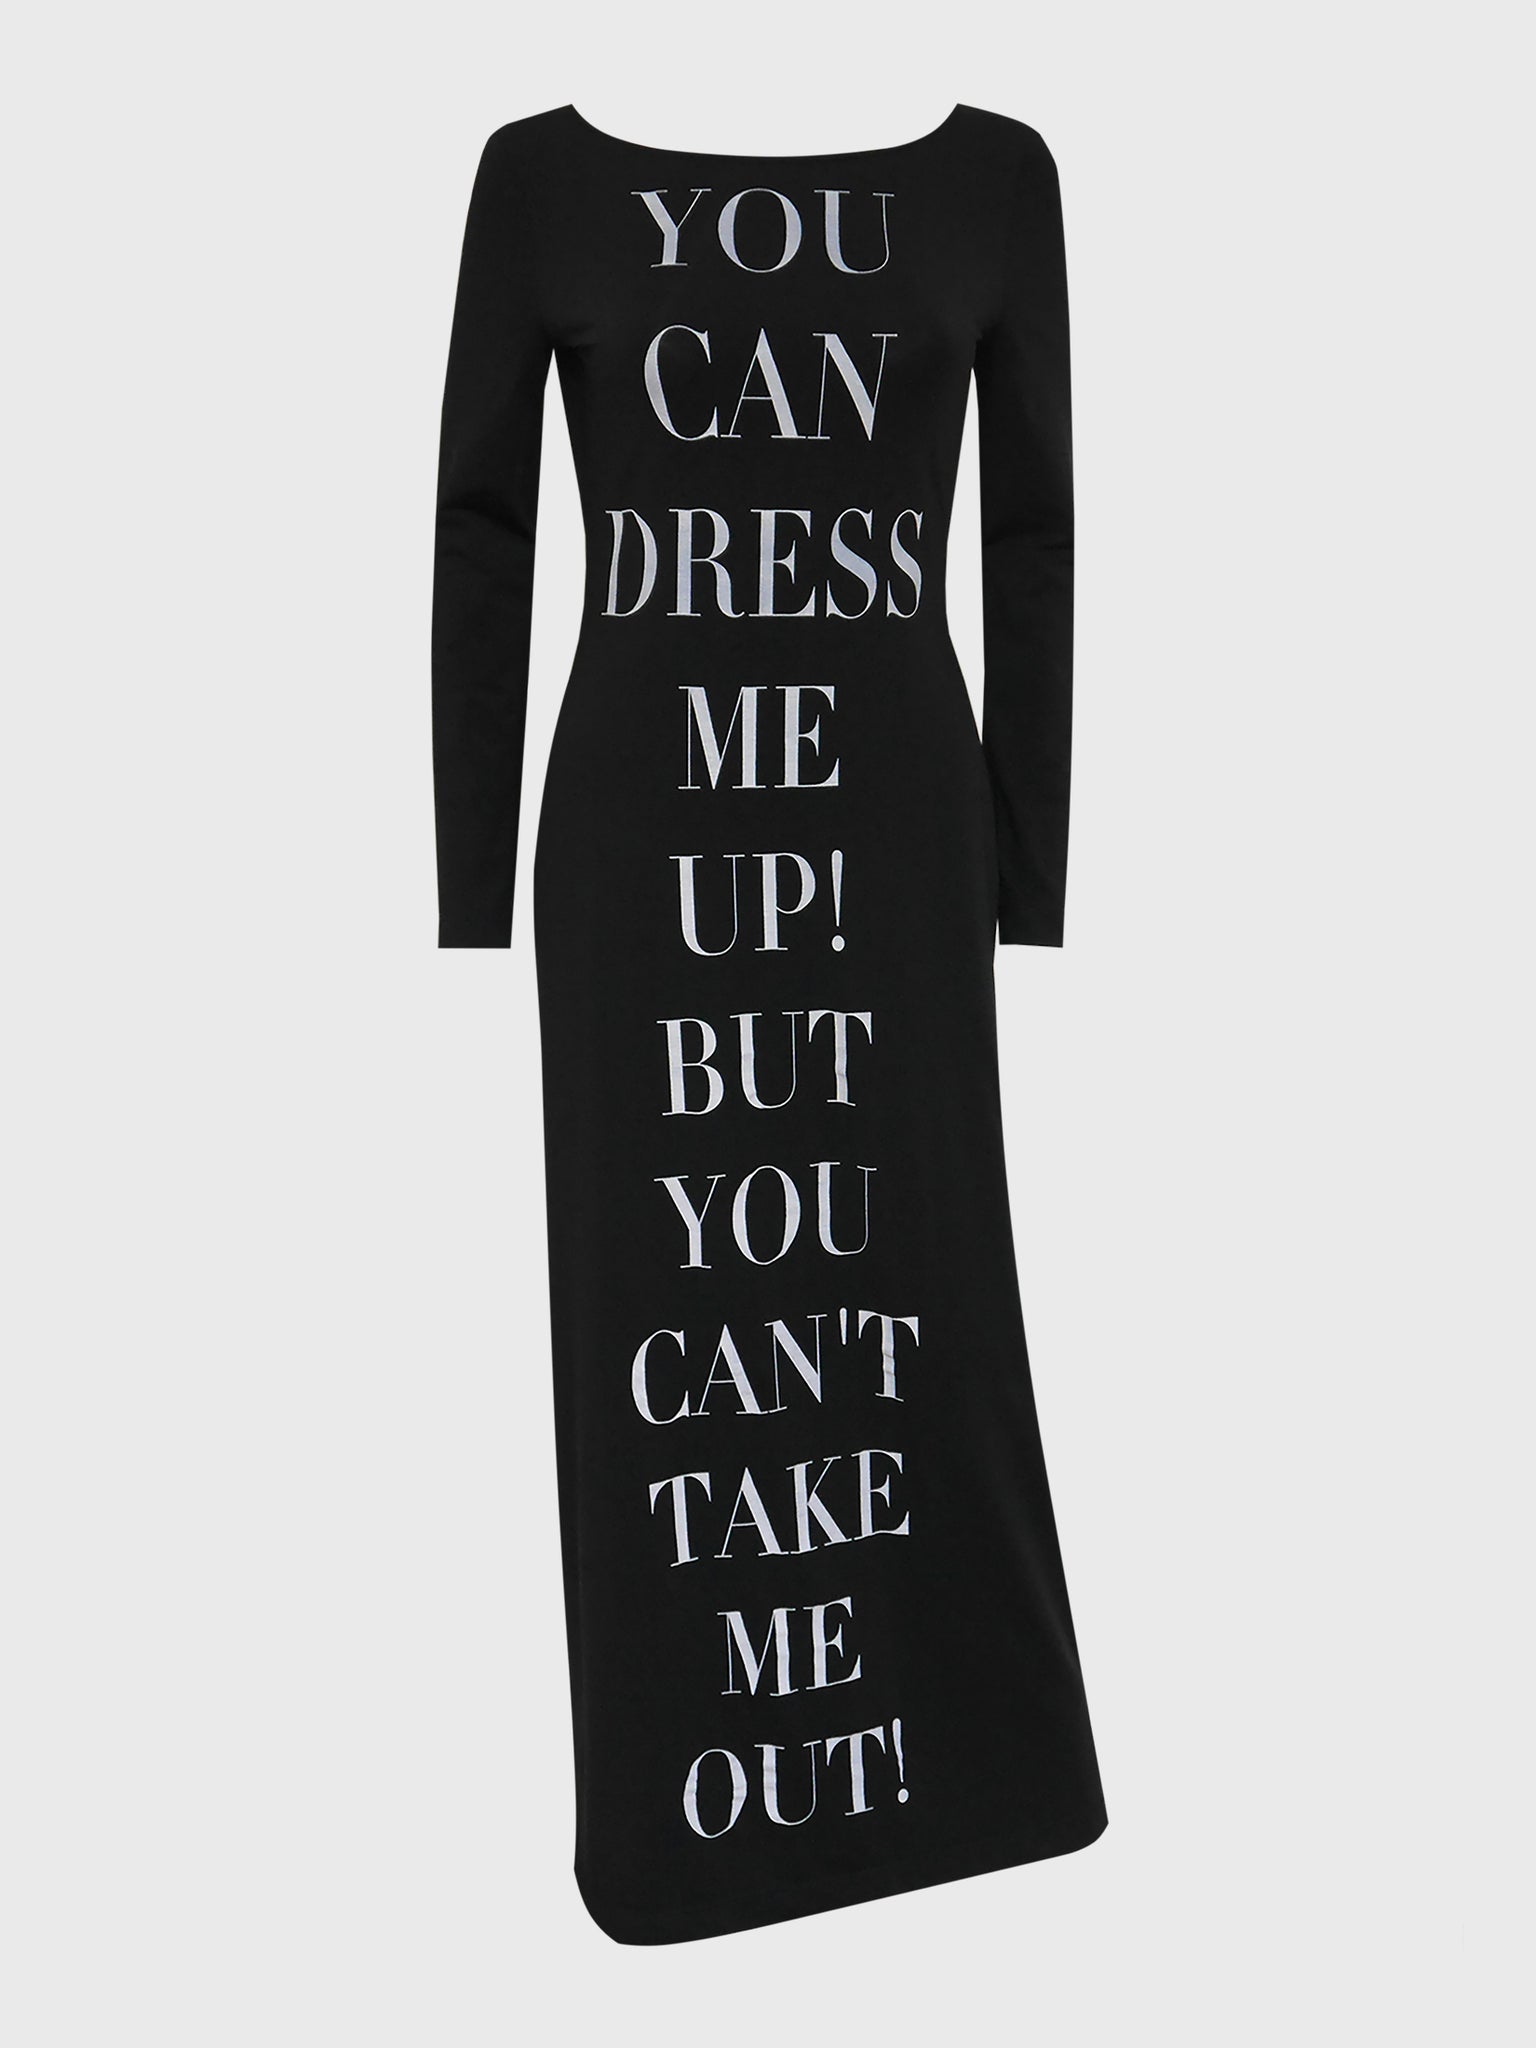 MOSCHINO "You Can Dress Me Up But You Can't Take Me Out" Vintage Maxi Dress